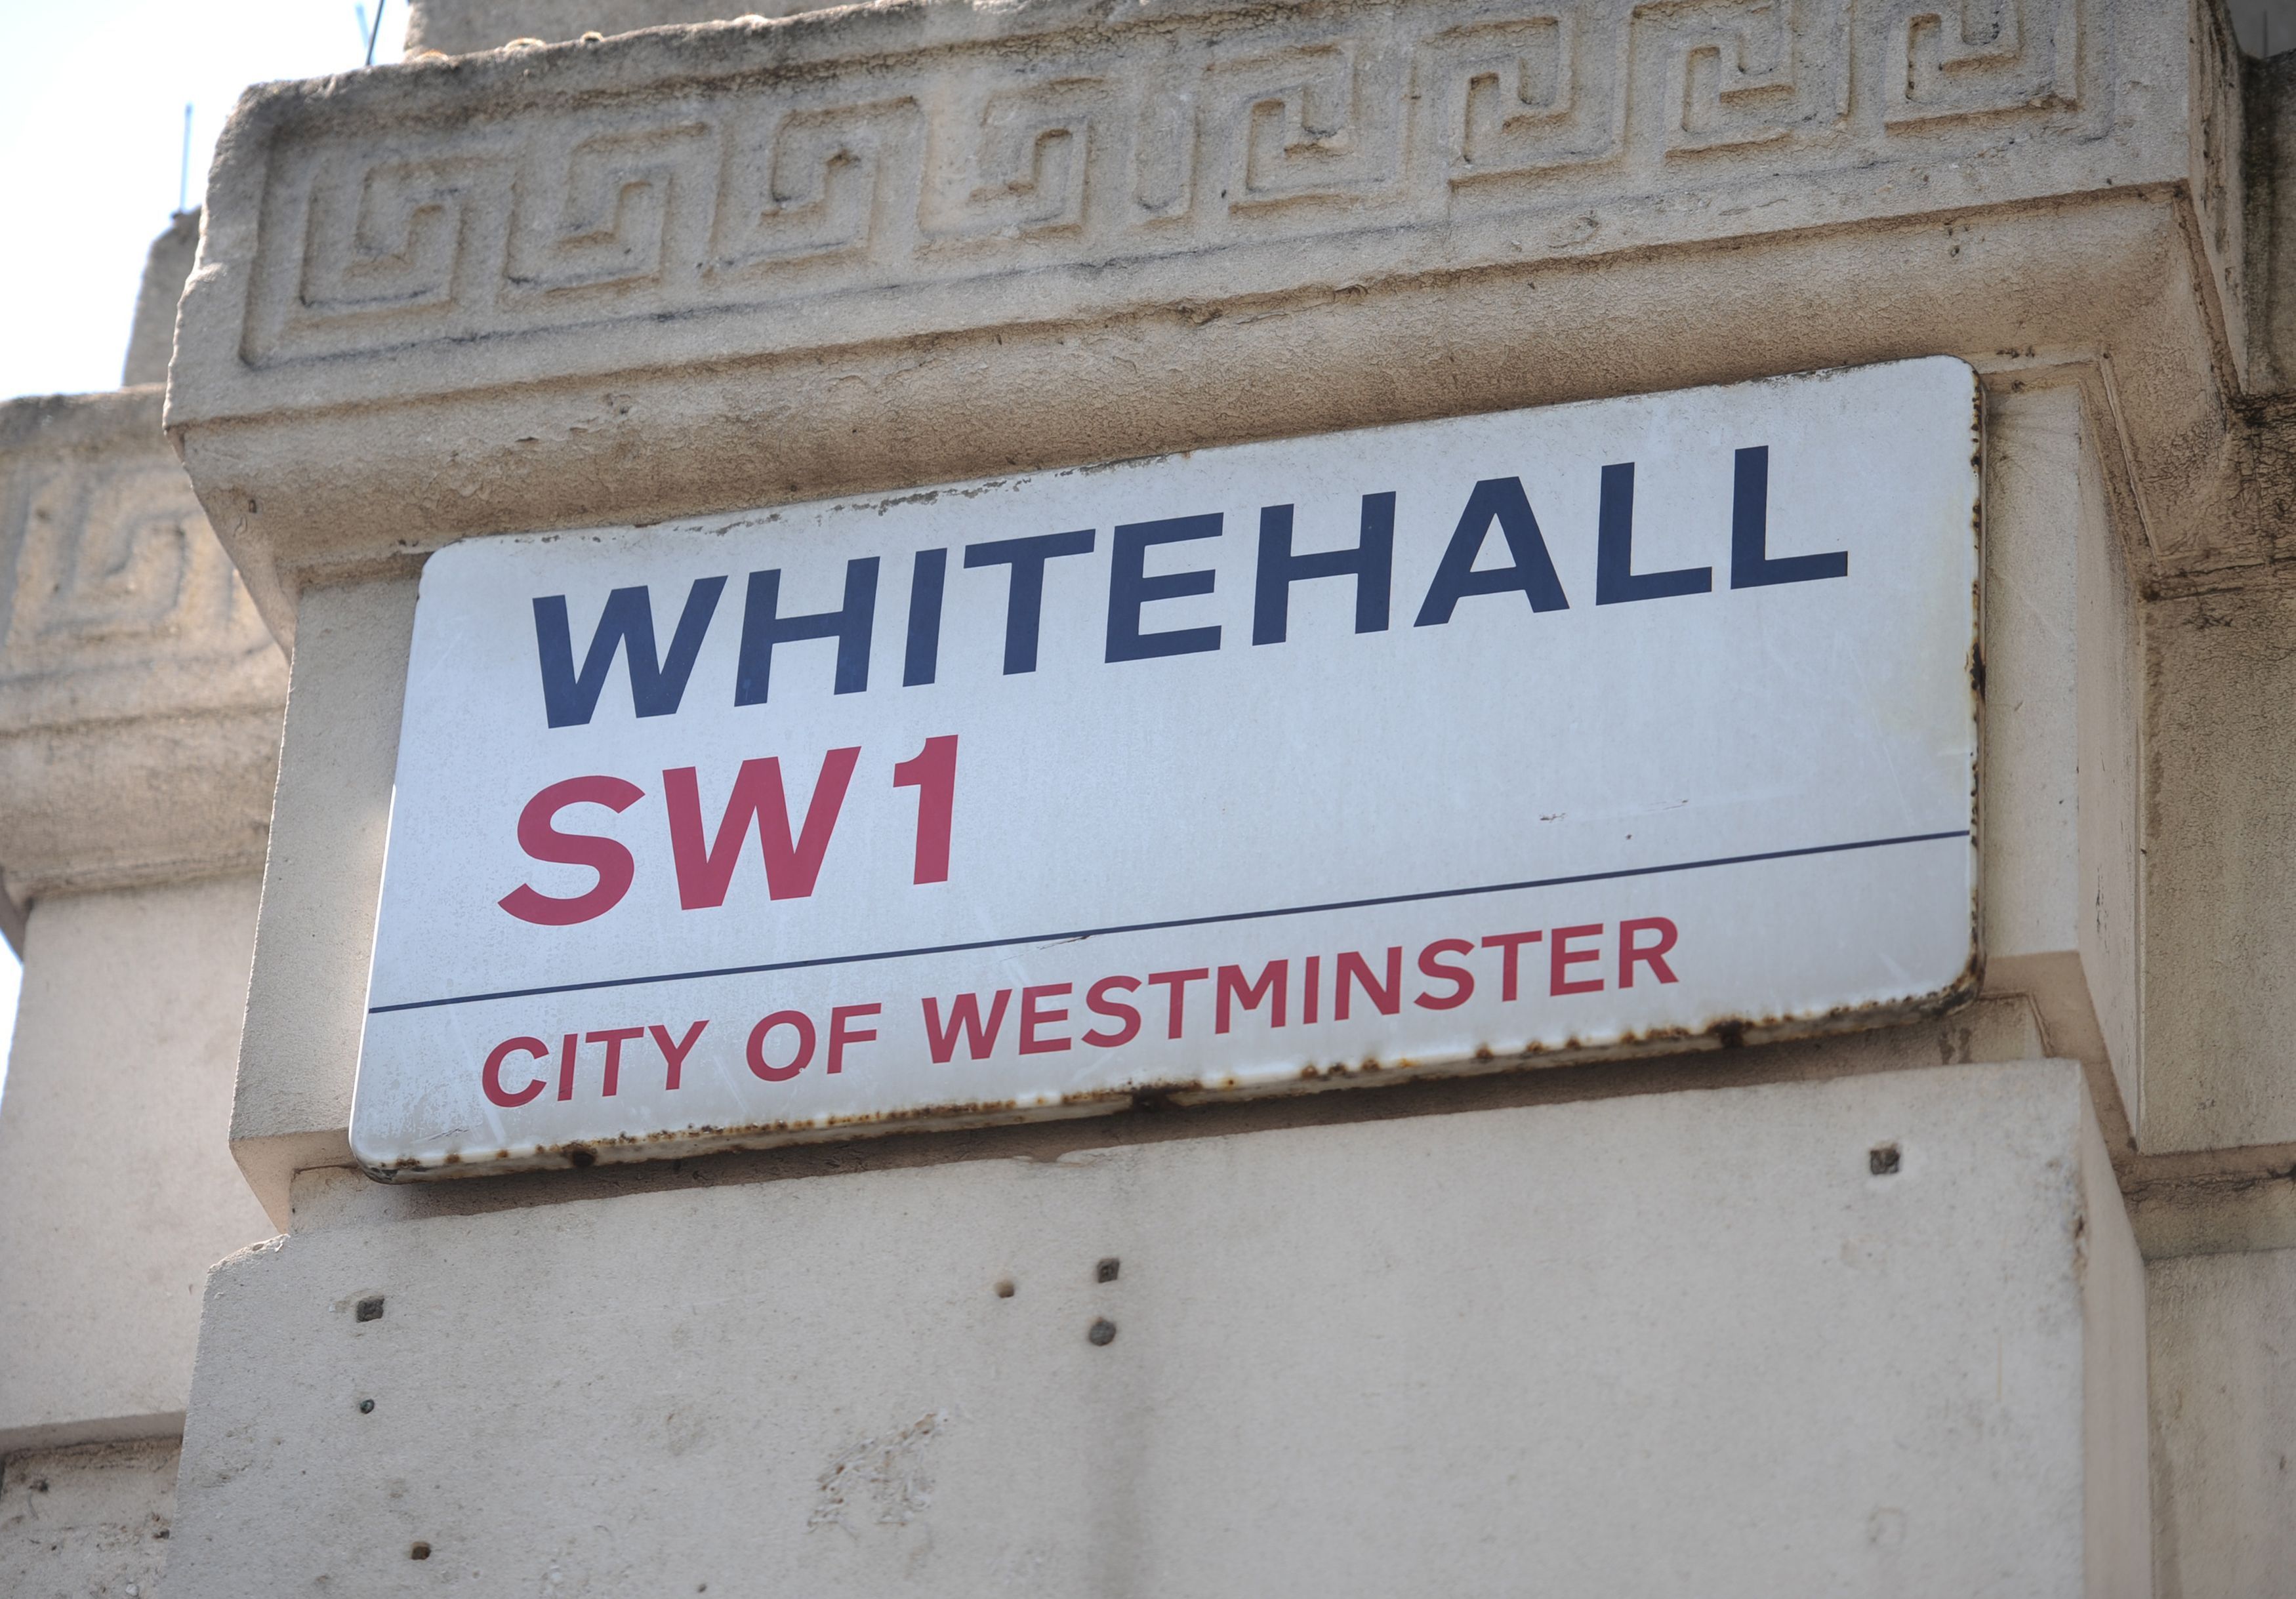 Whitehall, which houses several government departments, was temporarily closed